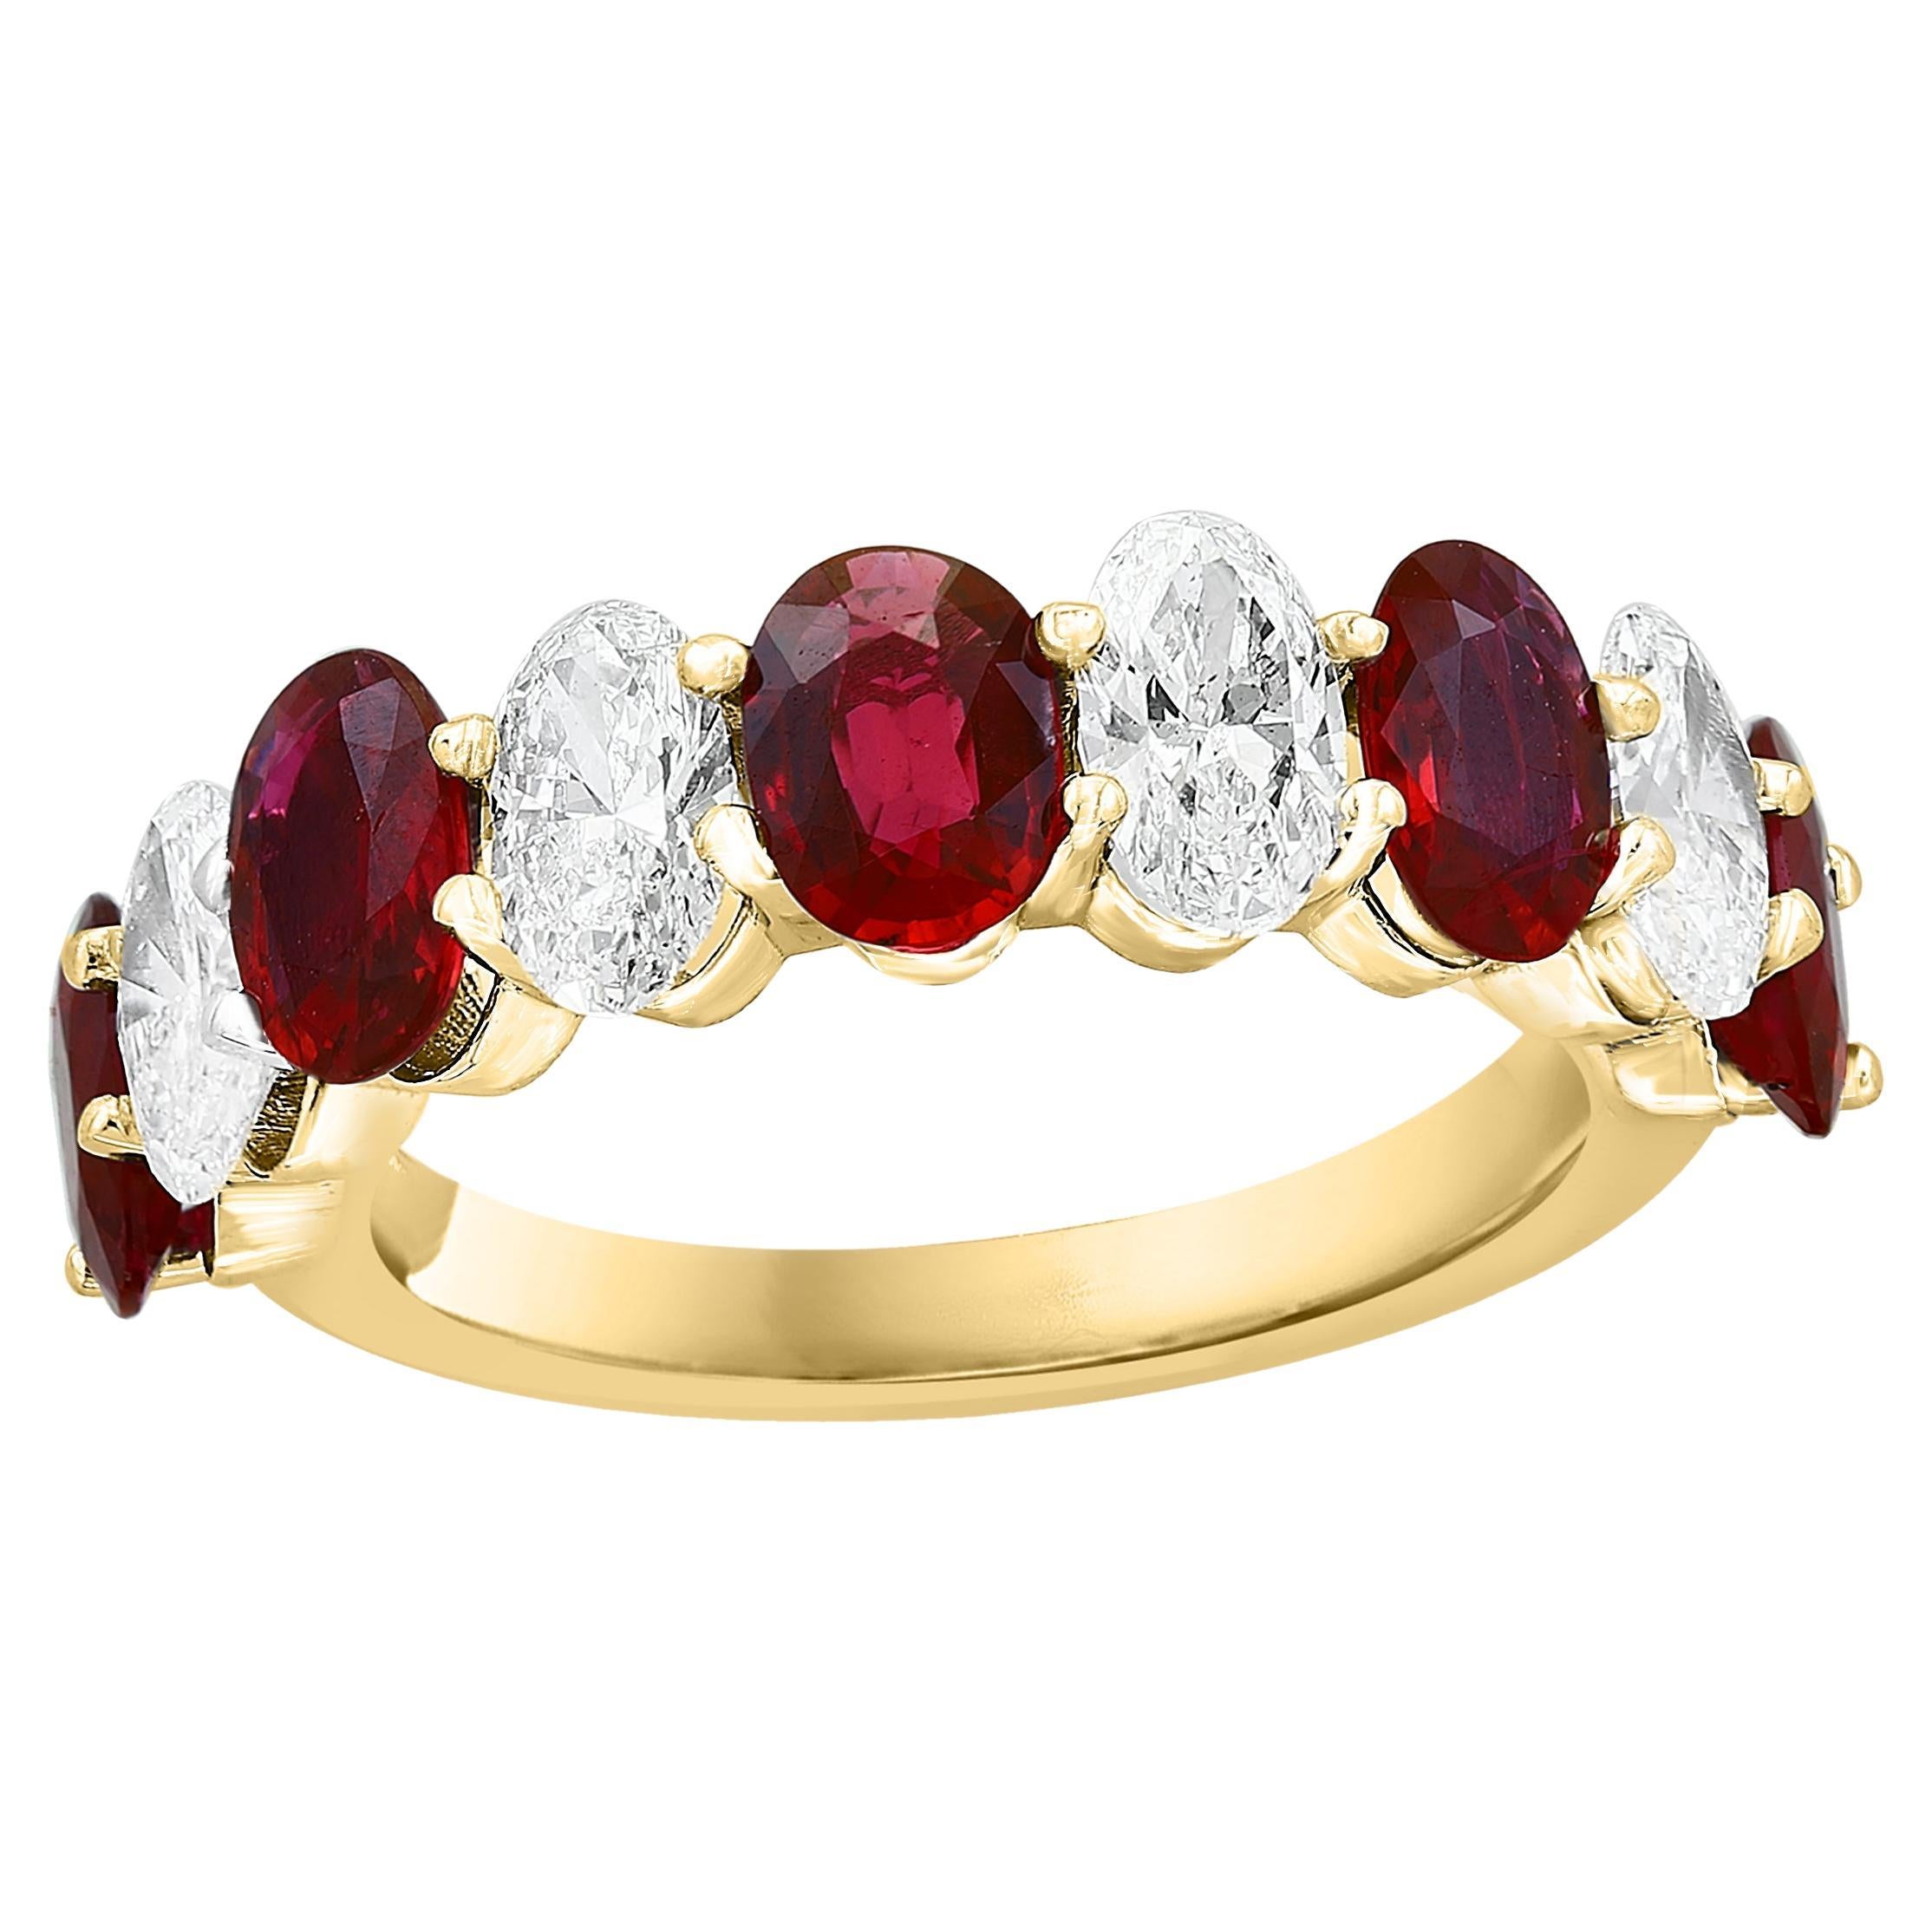 2.23 carat Oval Cut Ruby Diamond Eternity Wedding Band in 14K Yellow Gold For Sale